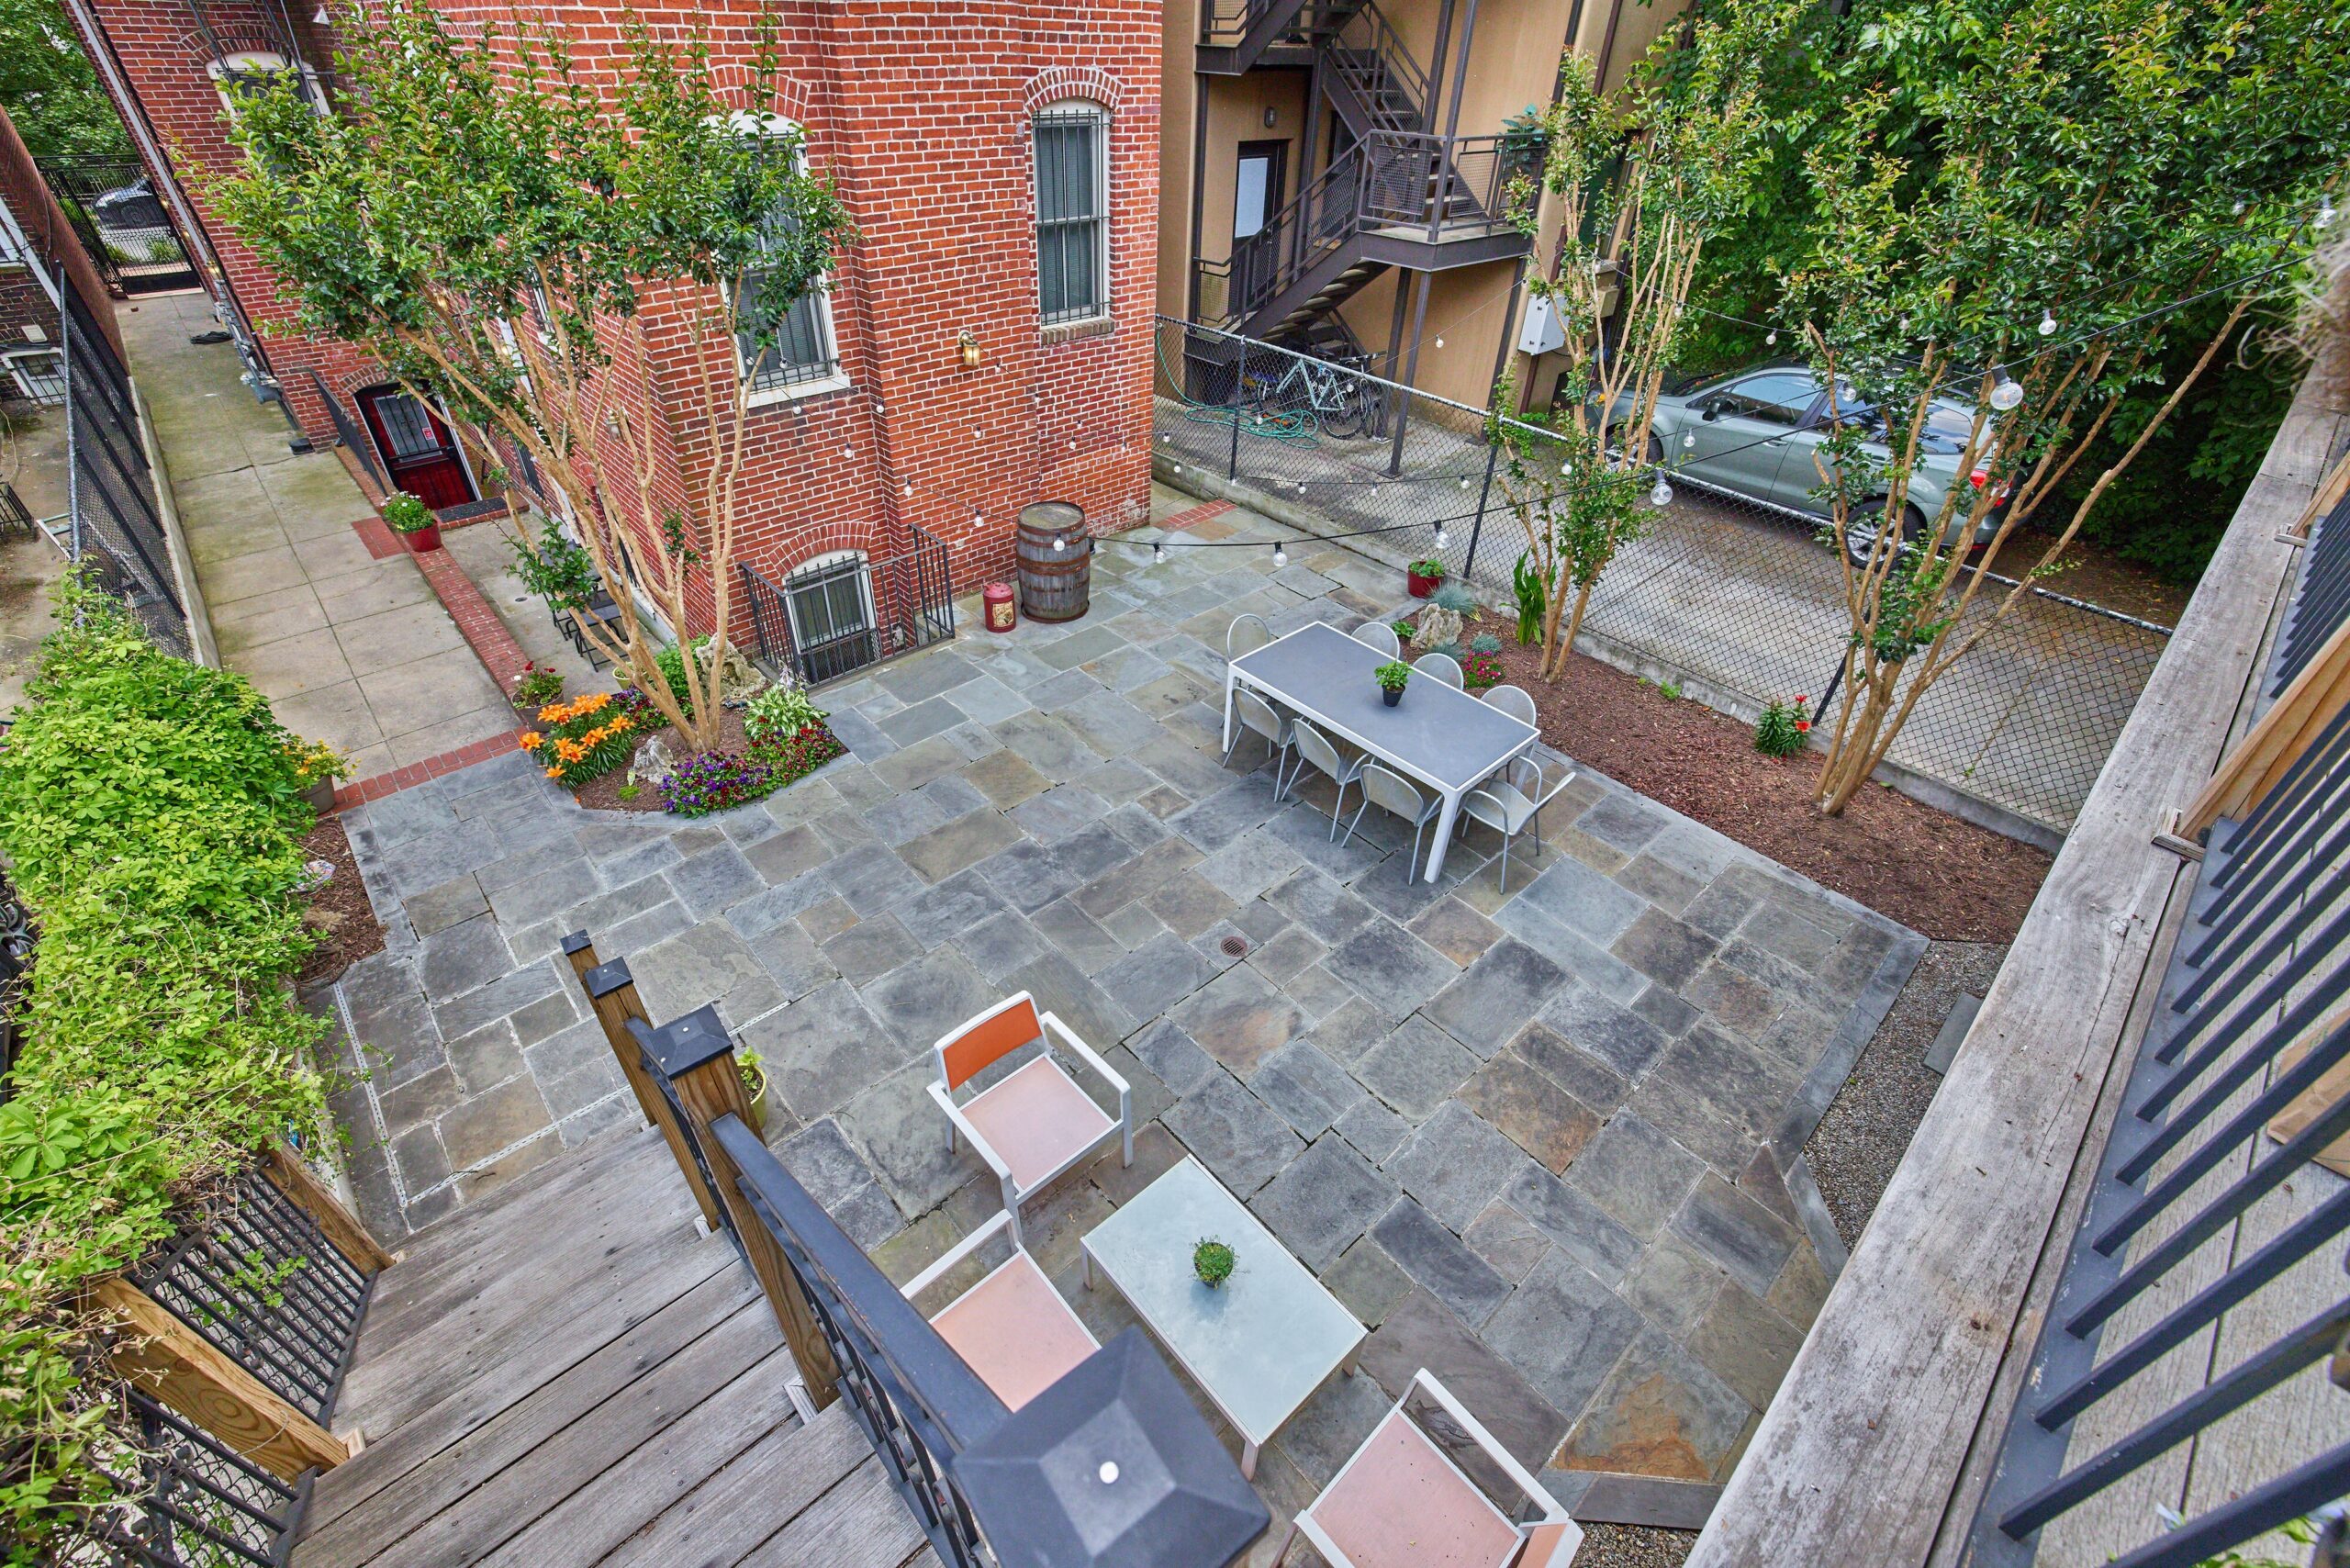 Professional exterior photo of 1459 Harvard St NW #6 - showing the rear of the building from the balcony where the entrance to #6 is looking down into the patio courtyard. 